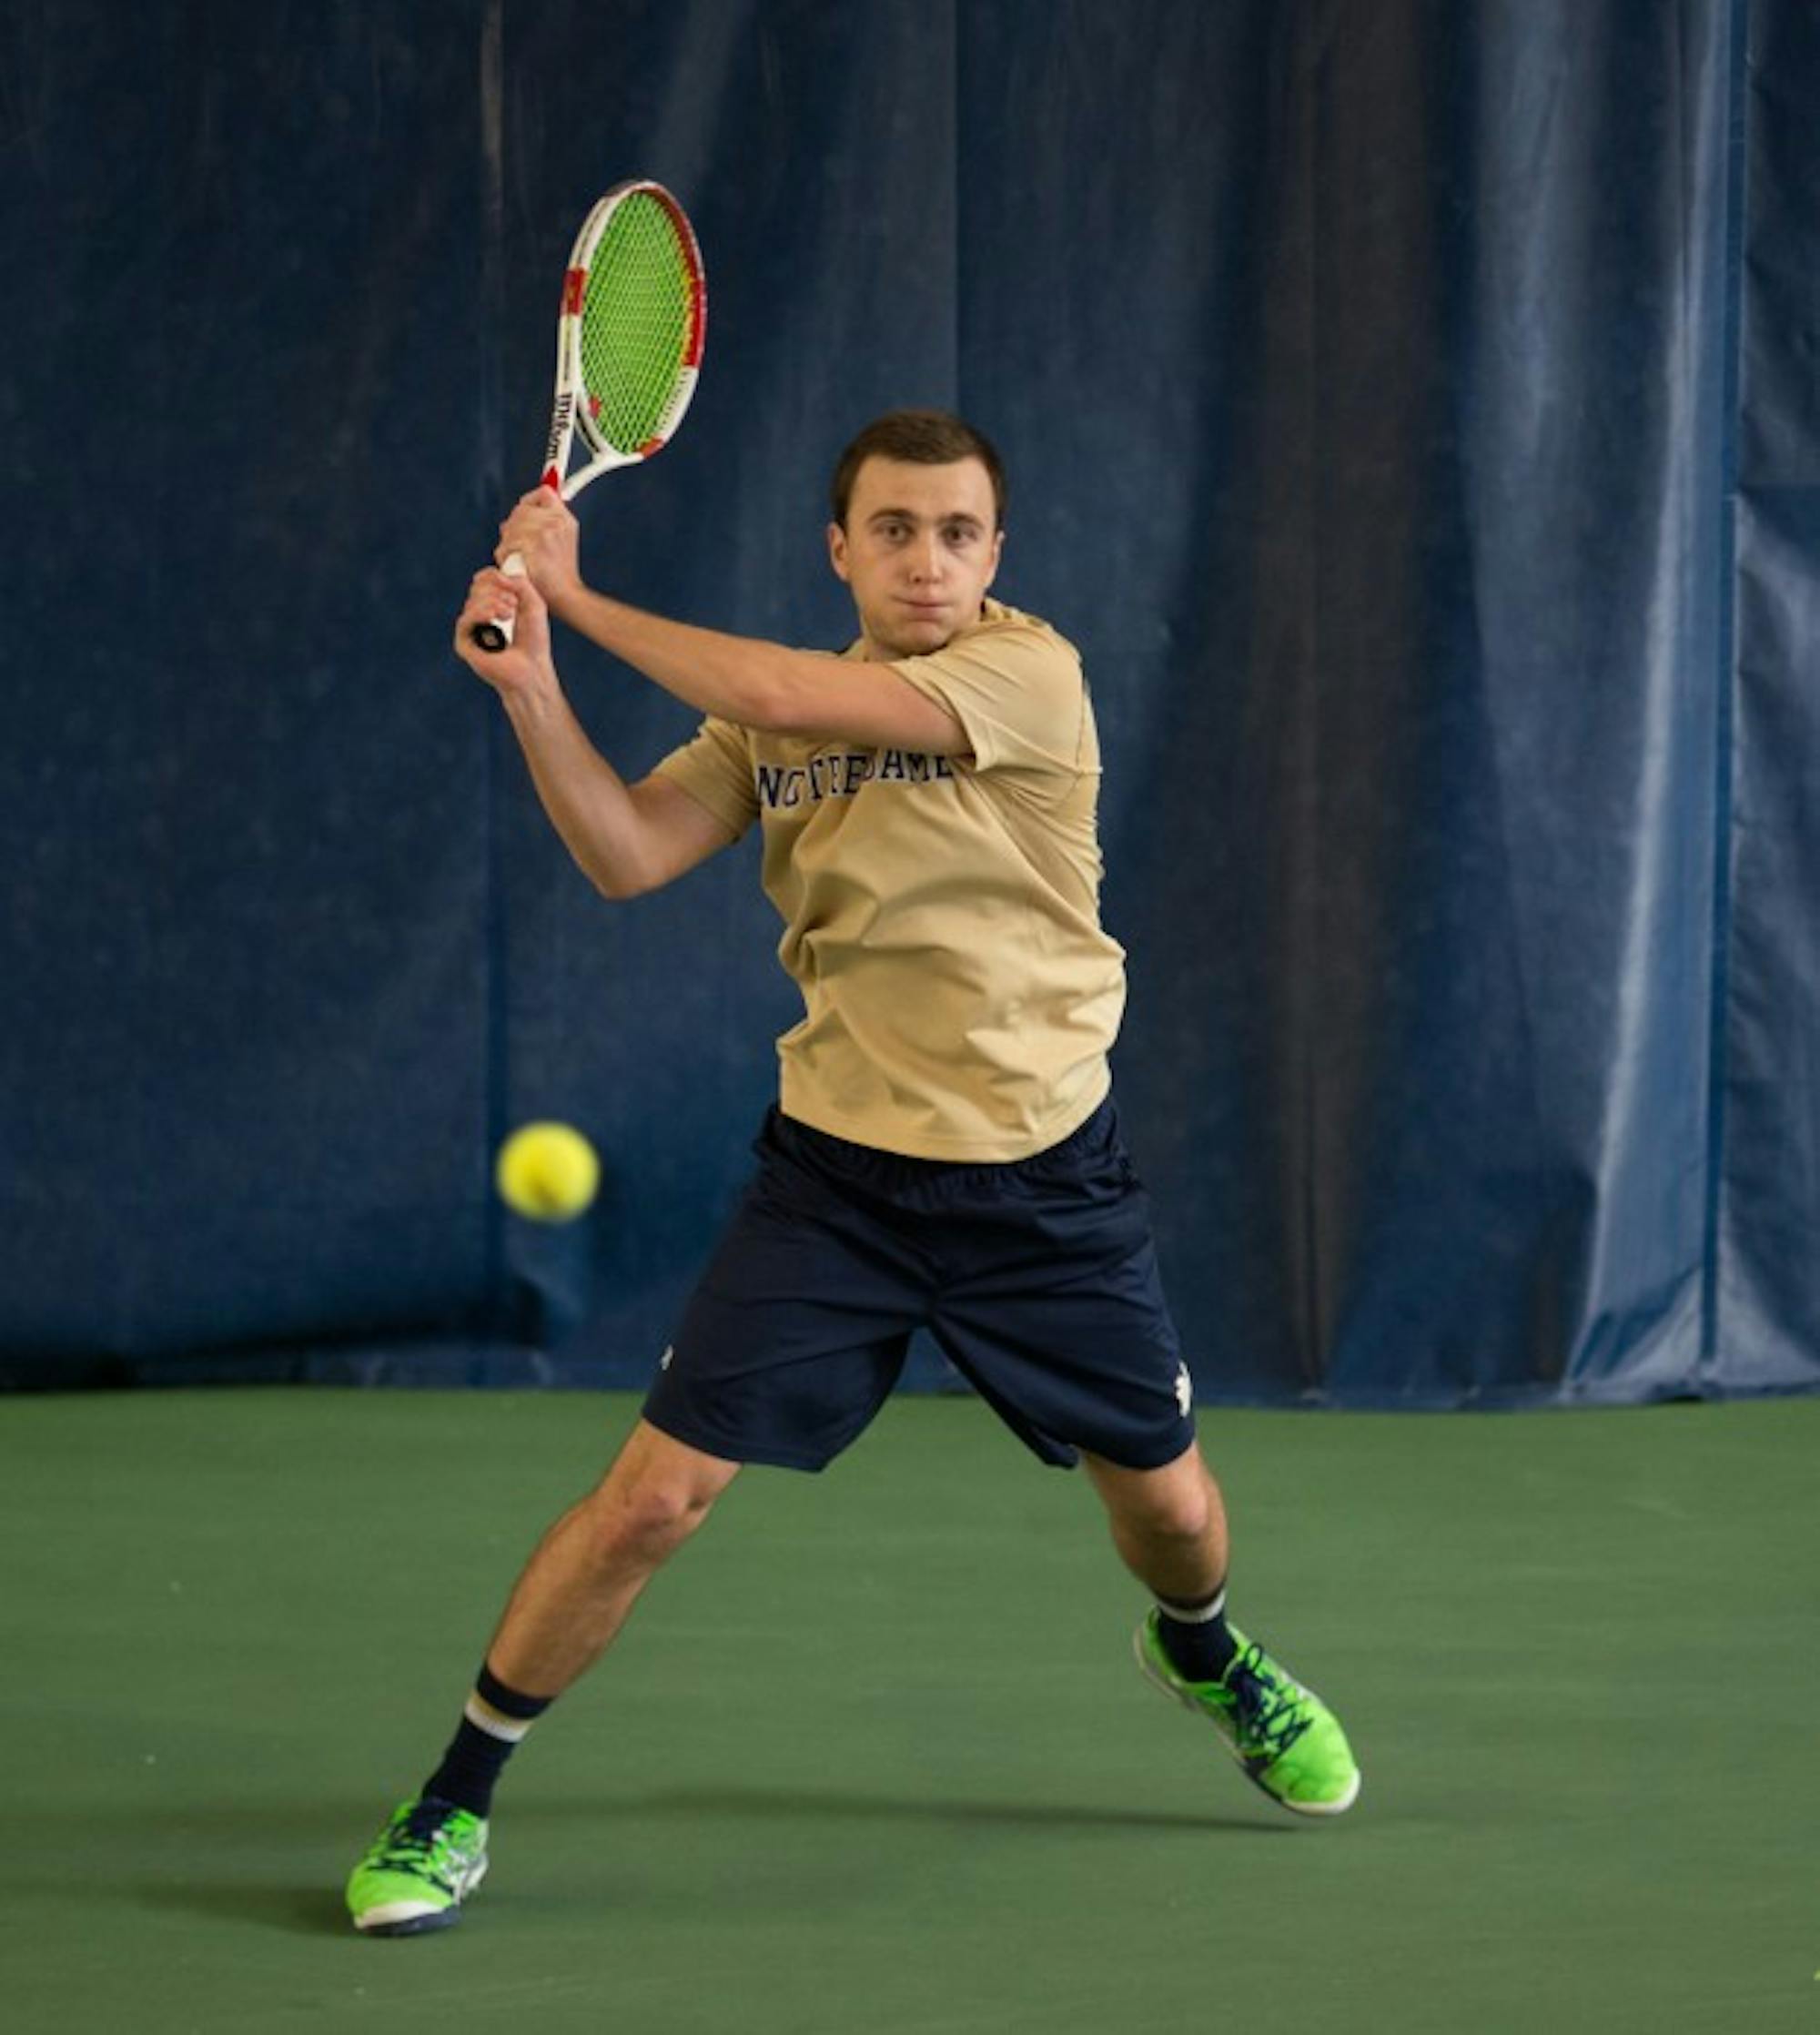 Irish sophomore Eddy Covalschi follows through on a shot during Notre Dame’s 4-3 win over Oklahoma State on Saturday.